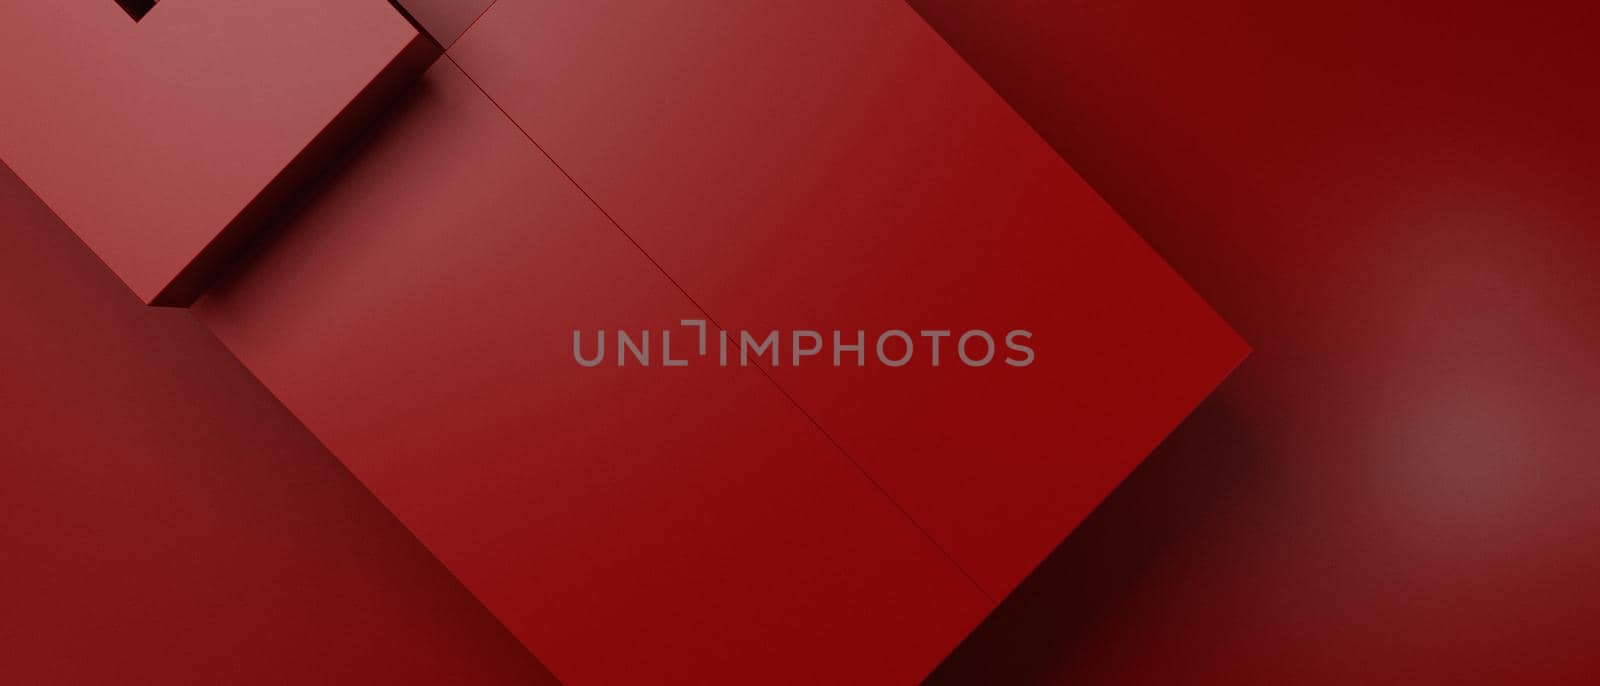 Abstract Shine Geometric Square Cubes Modern Dark Red Iillustration Background Wallpaper 3D Render by yay_lmrb